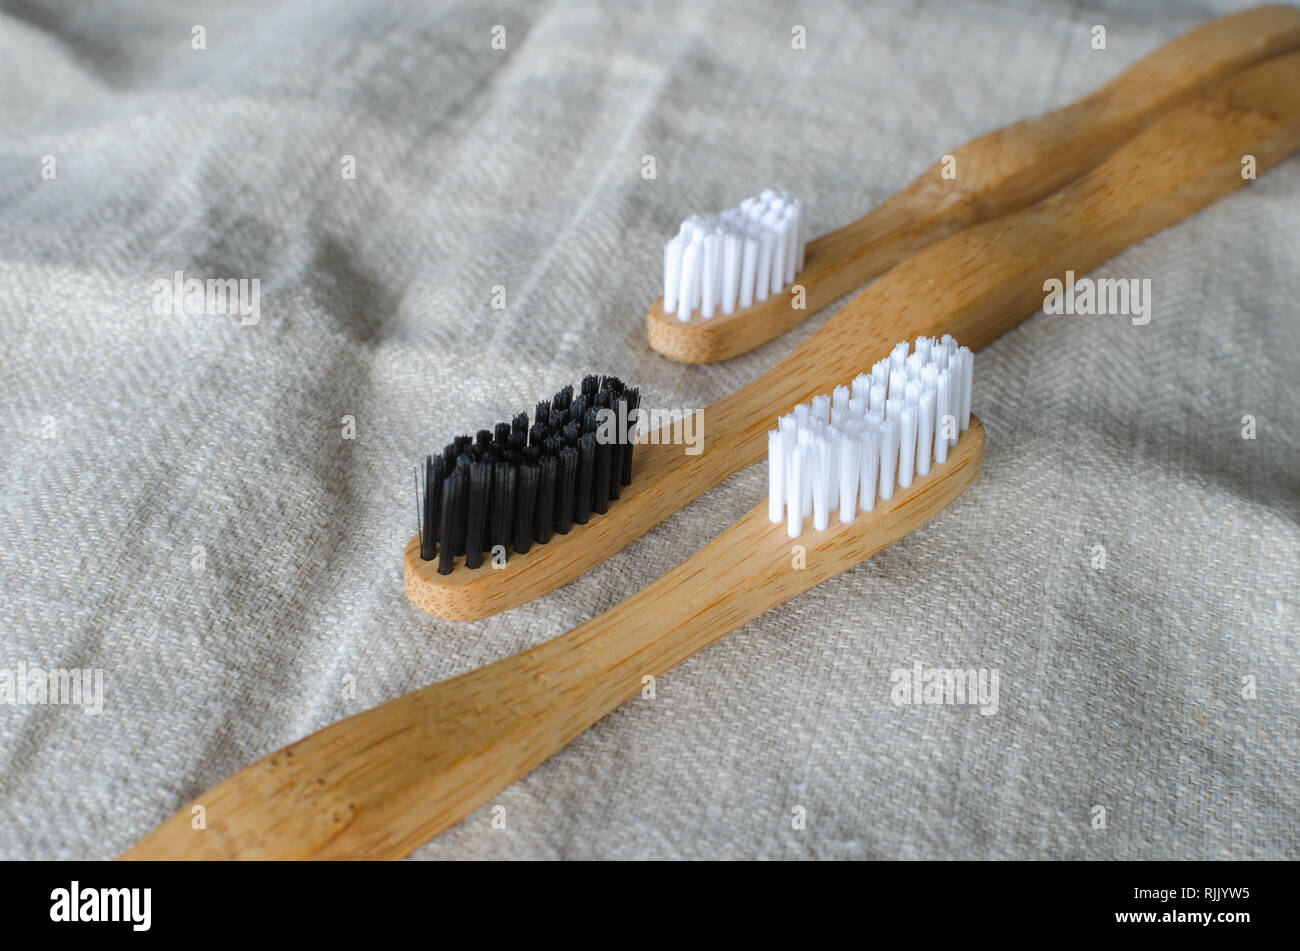 Three Bamboo toothbrushes on grey textile background Stock Photo